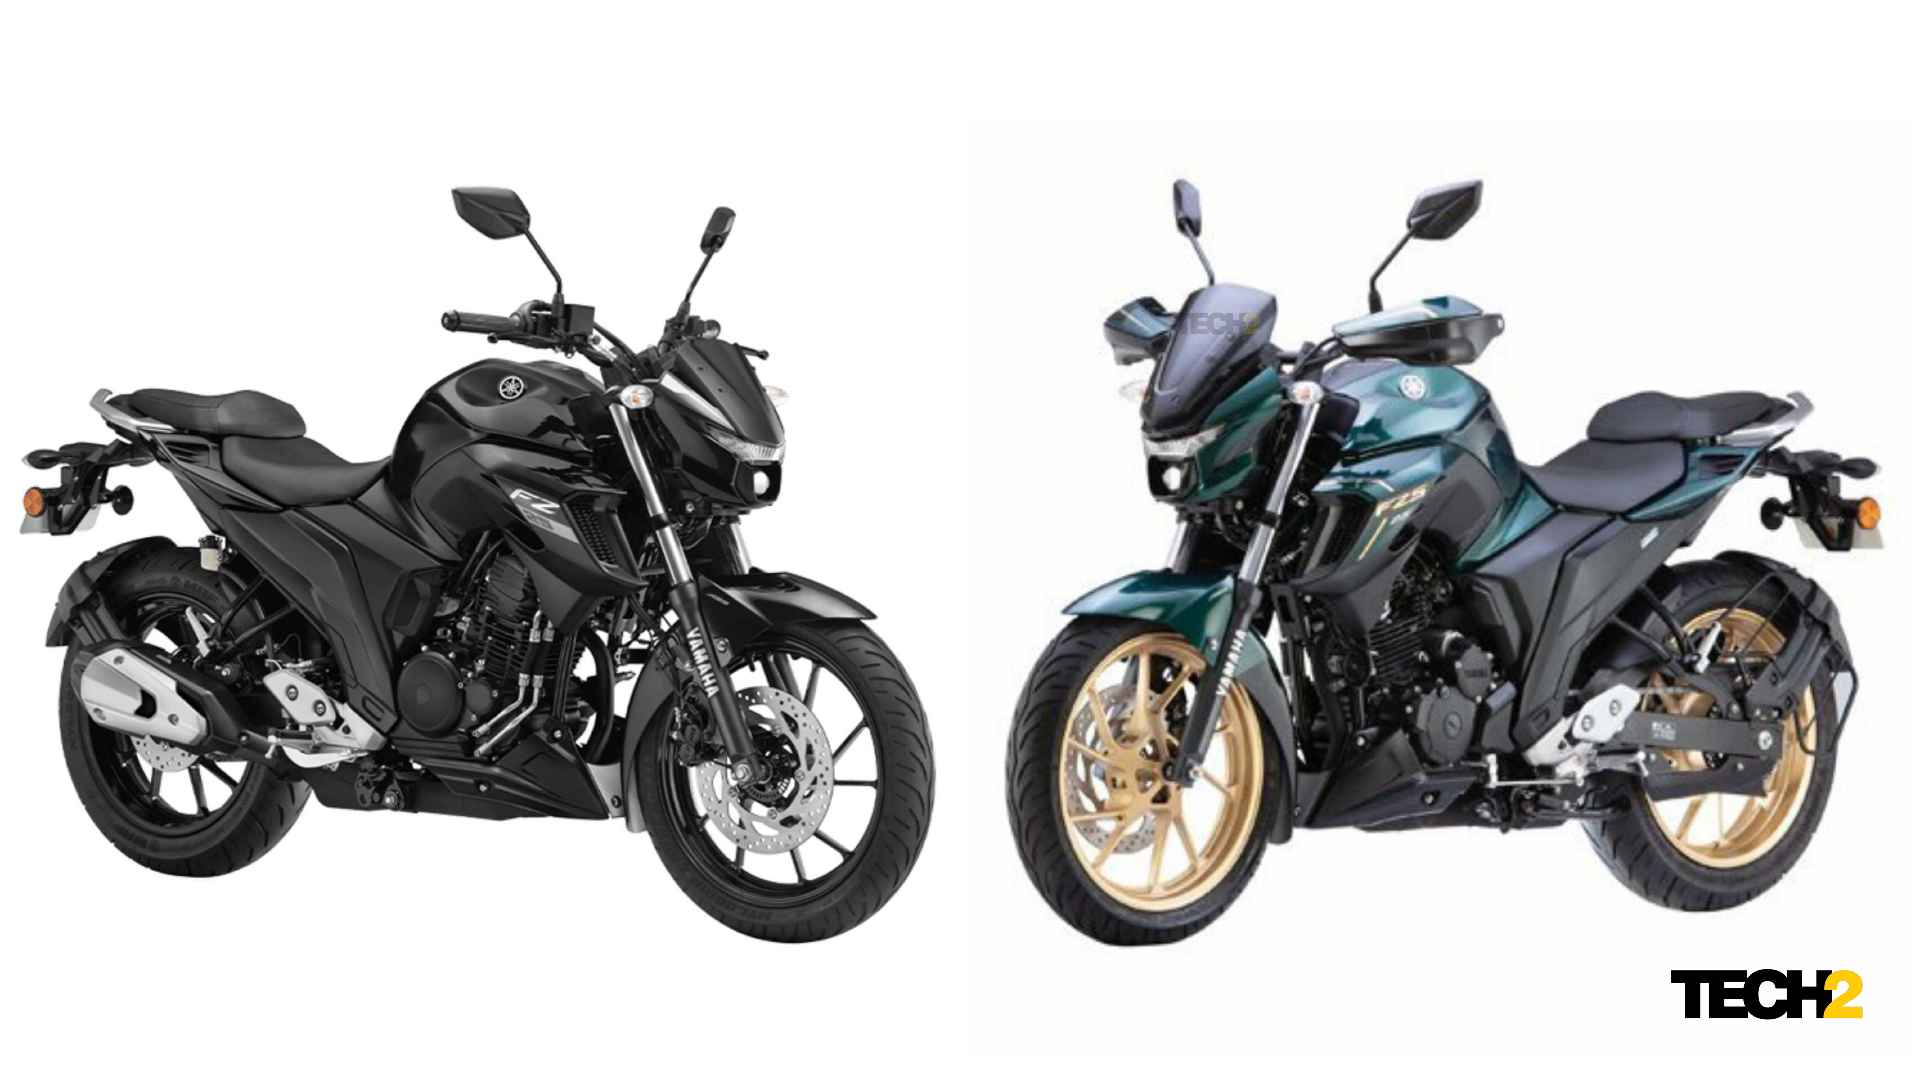 With this price drop, the Yamaha FZ25 and FZS 25 are now the most affordable 250 cc motorcycles in the country by a big margin. Image: Yamaha/Tech2